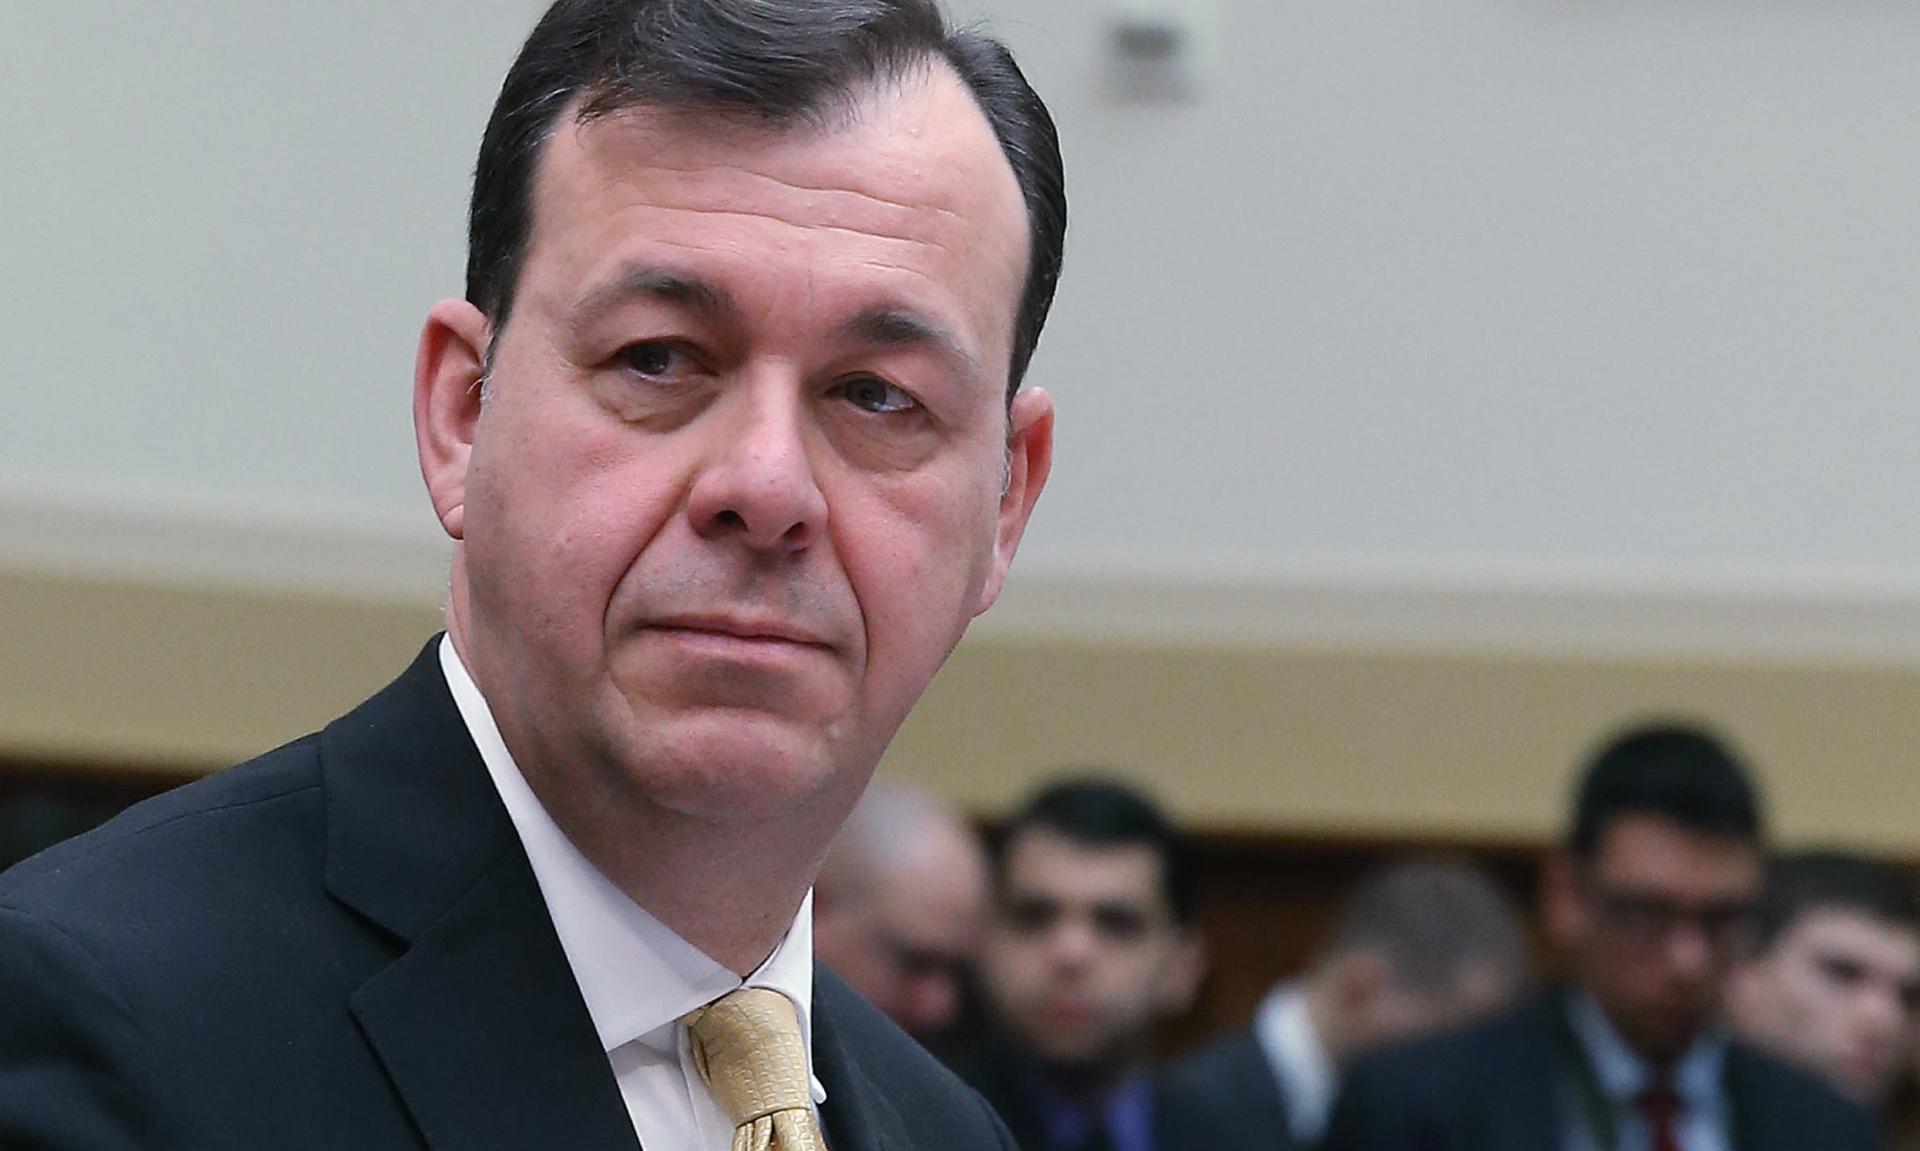 Gregory Touhill, former federal chief information security officer and deputy assistant Homeland Security secretary for cyber security operations, seen here at a House Foreign Affairs Committee hearing in 2015 in Washington, DC. Touhill was named director of Carnegie Mellon University&#8217;s CERT in April. (Photo by Mark Wilson/Getty Images)